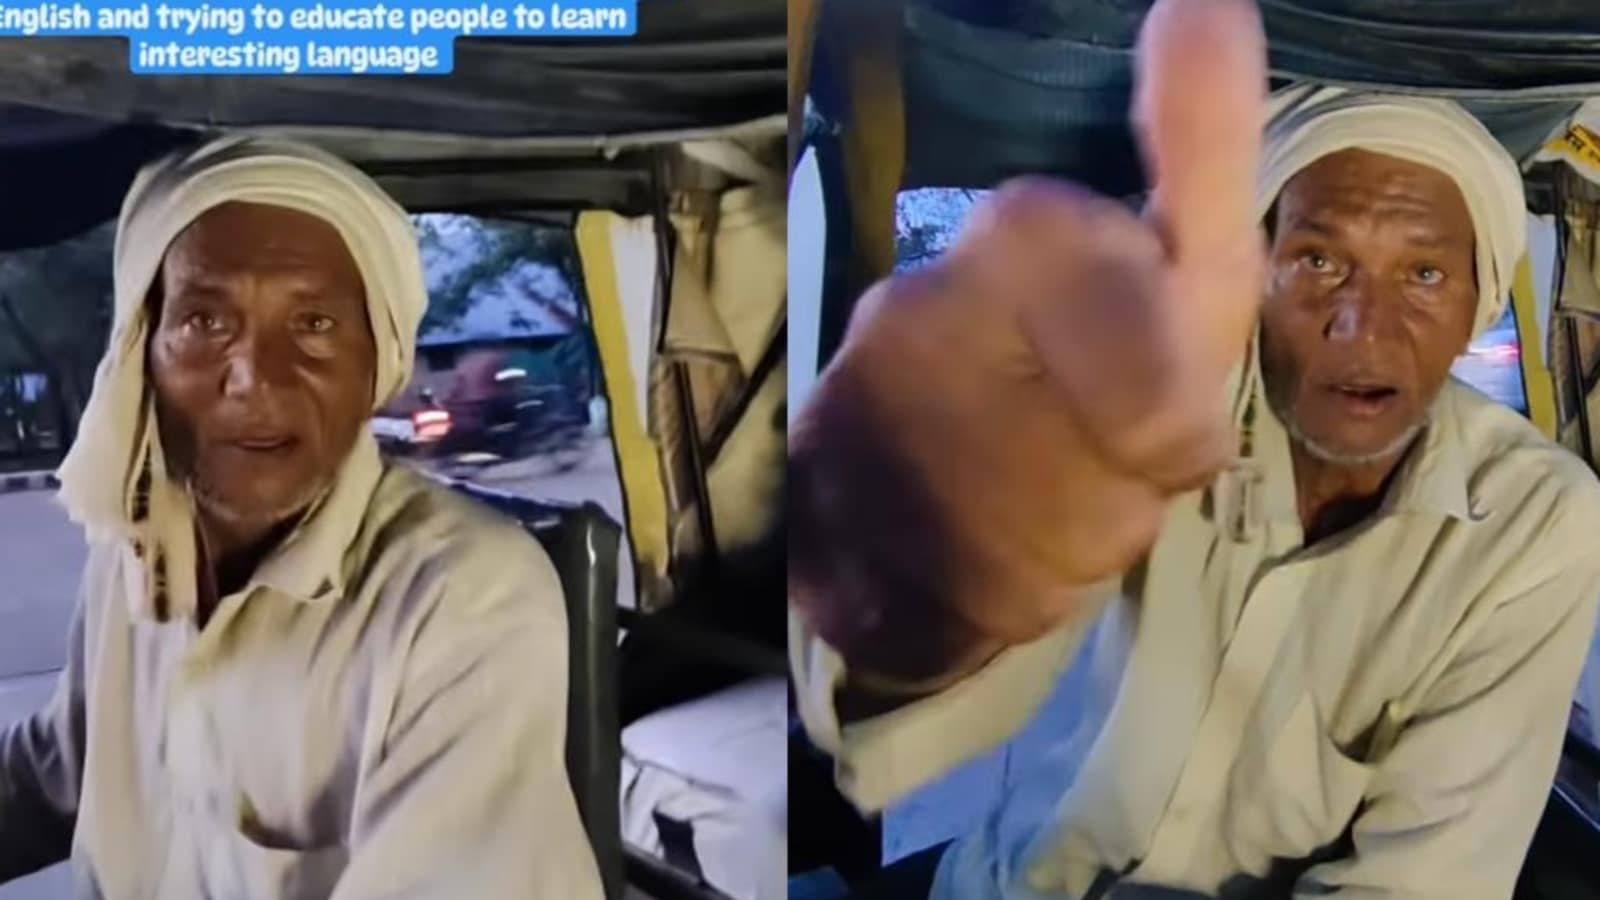 Amravati auto driver’s fluent English stuns commuters: ‘If you know English, you can go to London, America’. Watch